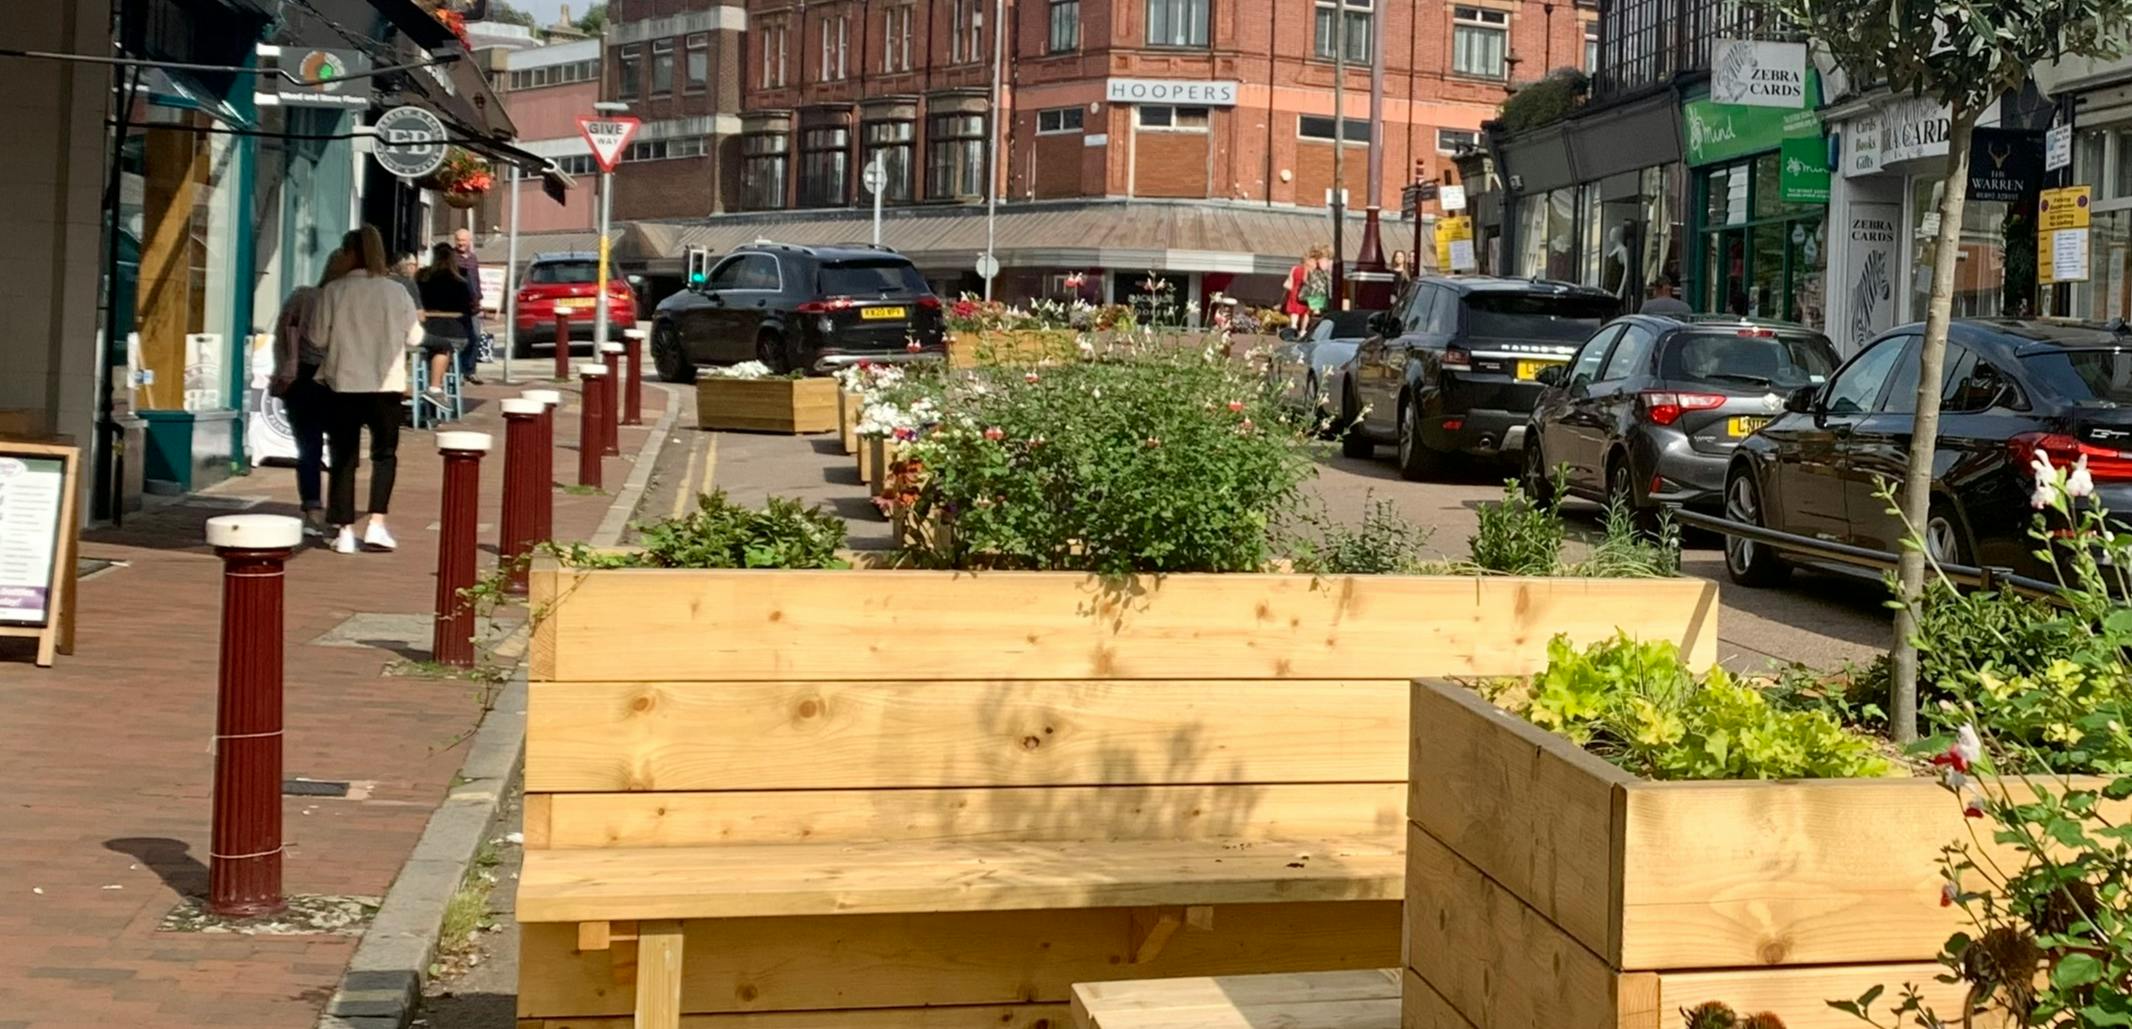 Parklets and planters at the Northern end of the High Street, Tunbridge Wells